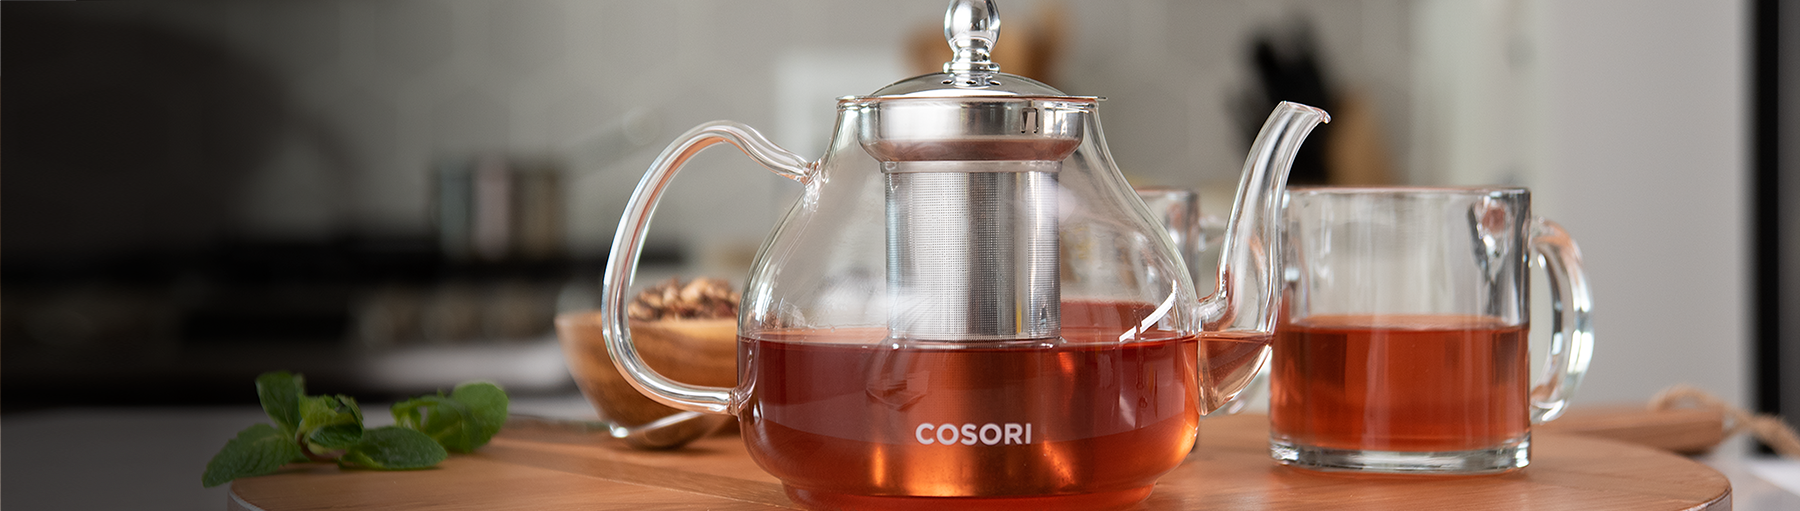 COSORI Glass Teapot with Removable Stainless Steel Infuser, 1000